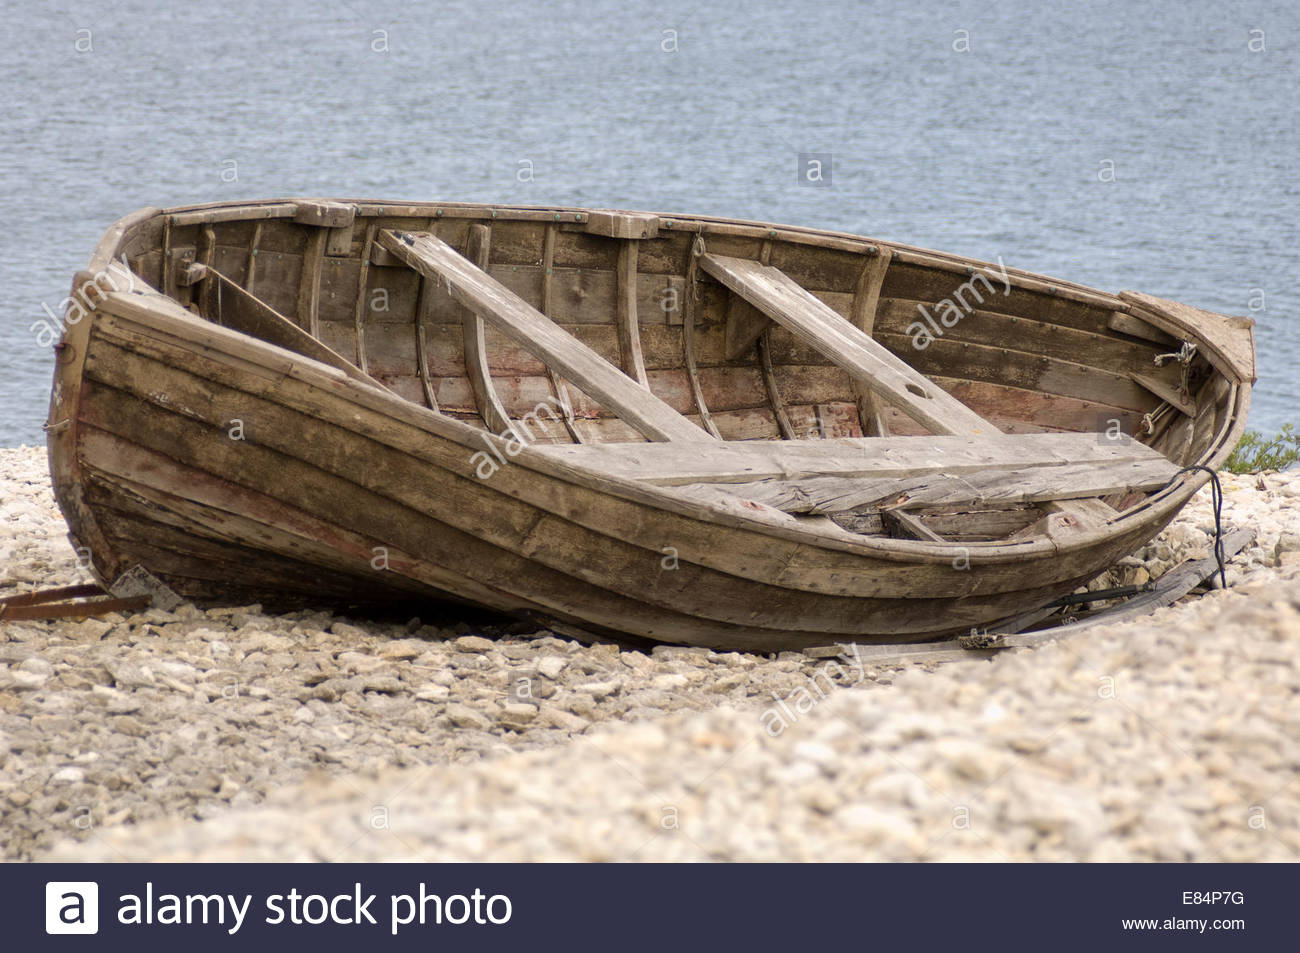 Old broken wooden boat on a beach Stock Photo, Royalty ...